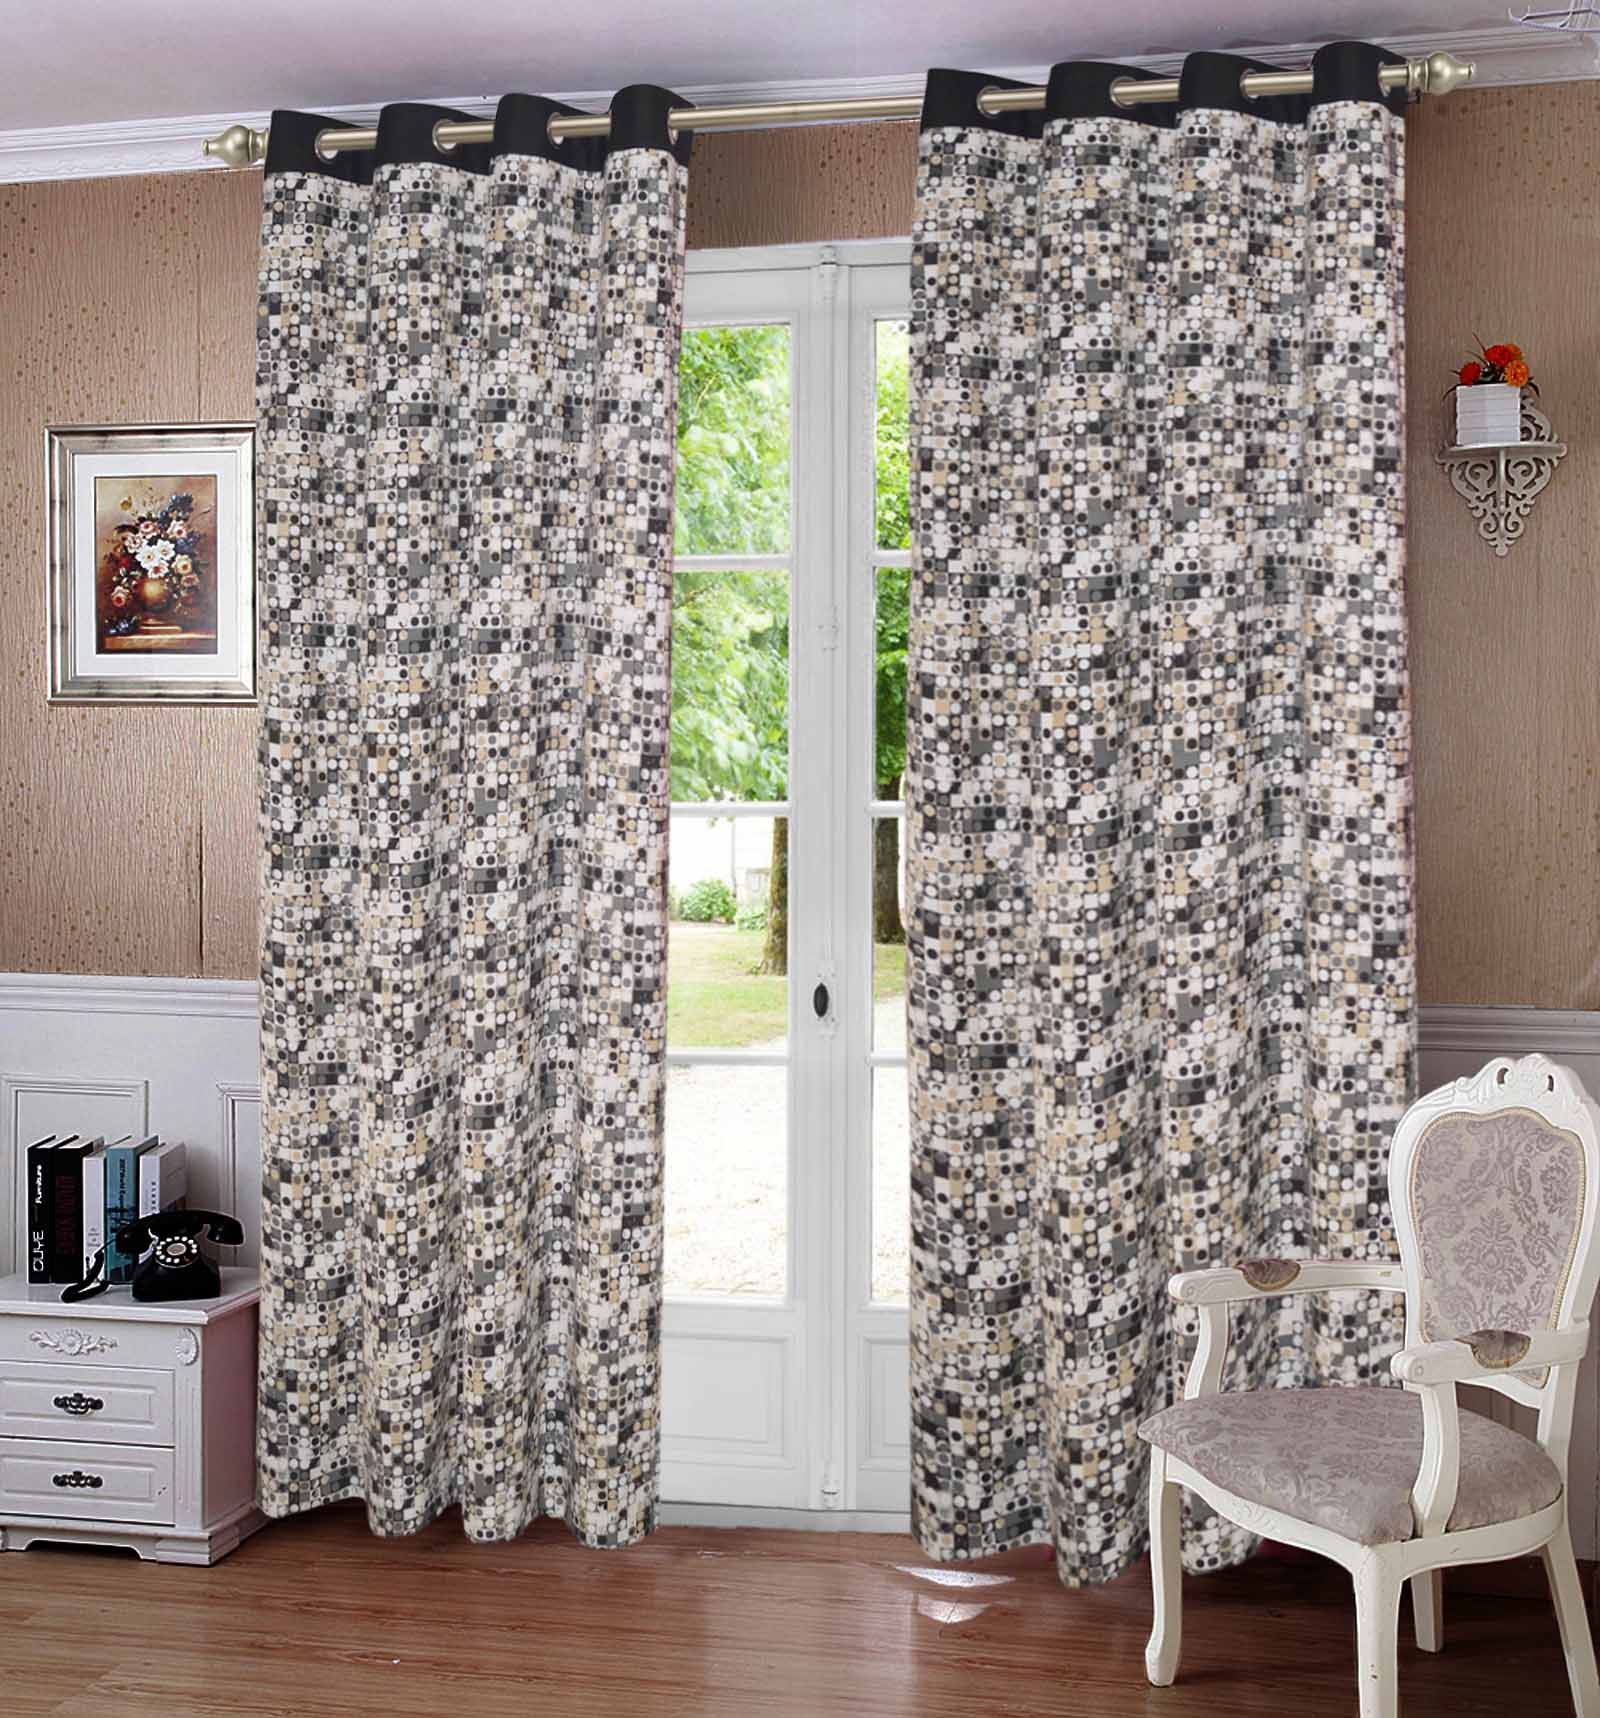 Lushomes Door Curtain, Cotton Coins Printed Cotton Curtains for Living Room/Home with 8 Eyelets & Printed Tiebacks, Door Curtain, Curtain 7.5 Feet, Screen for Window, (Size 54x90 Inches, Set of 1)